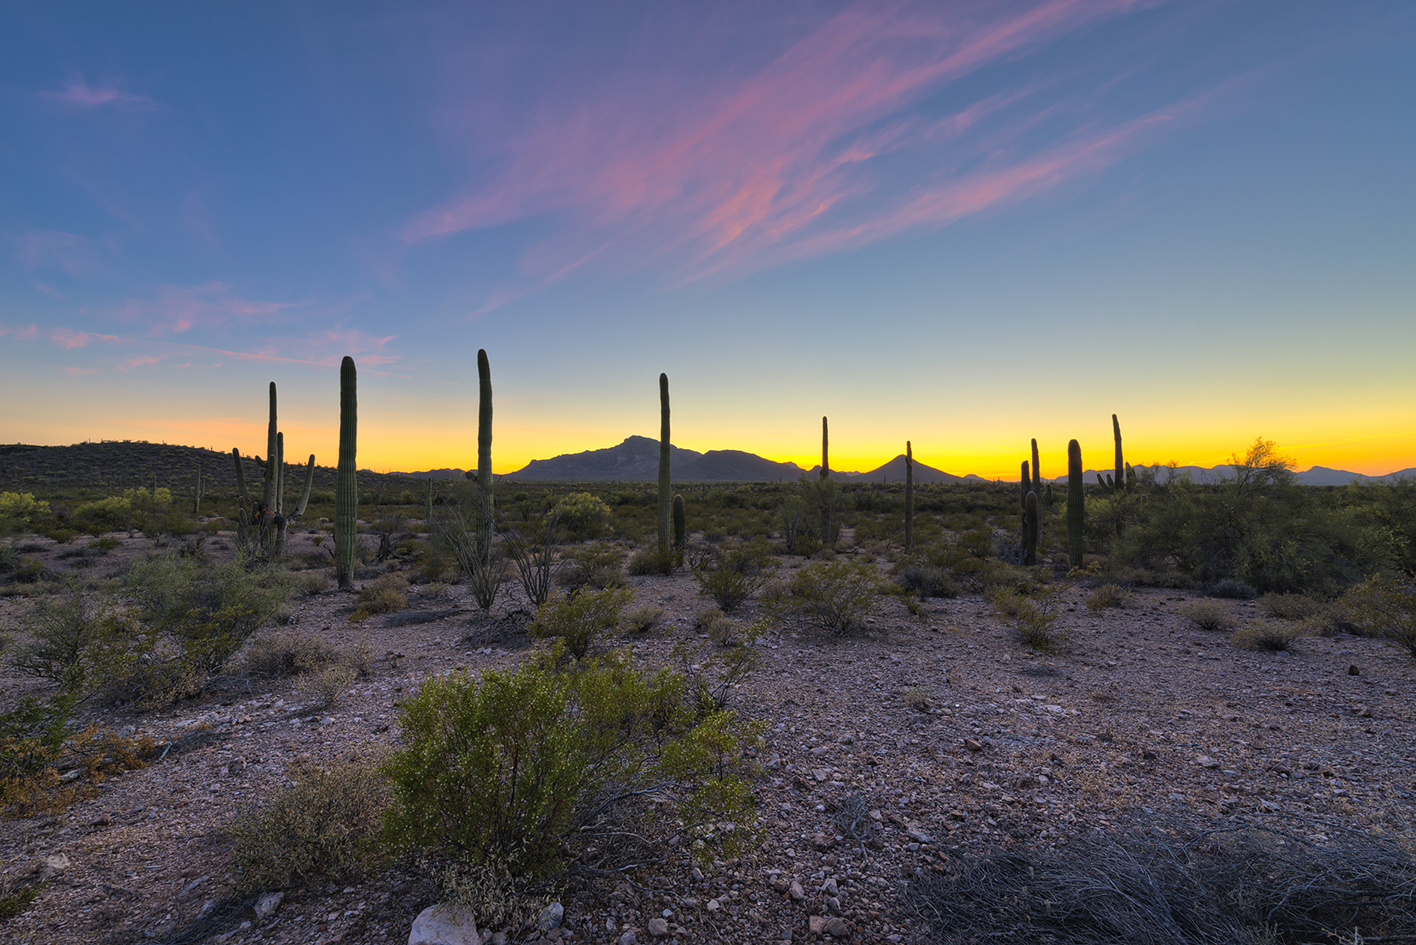 Sunset at the Ajo